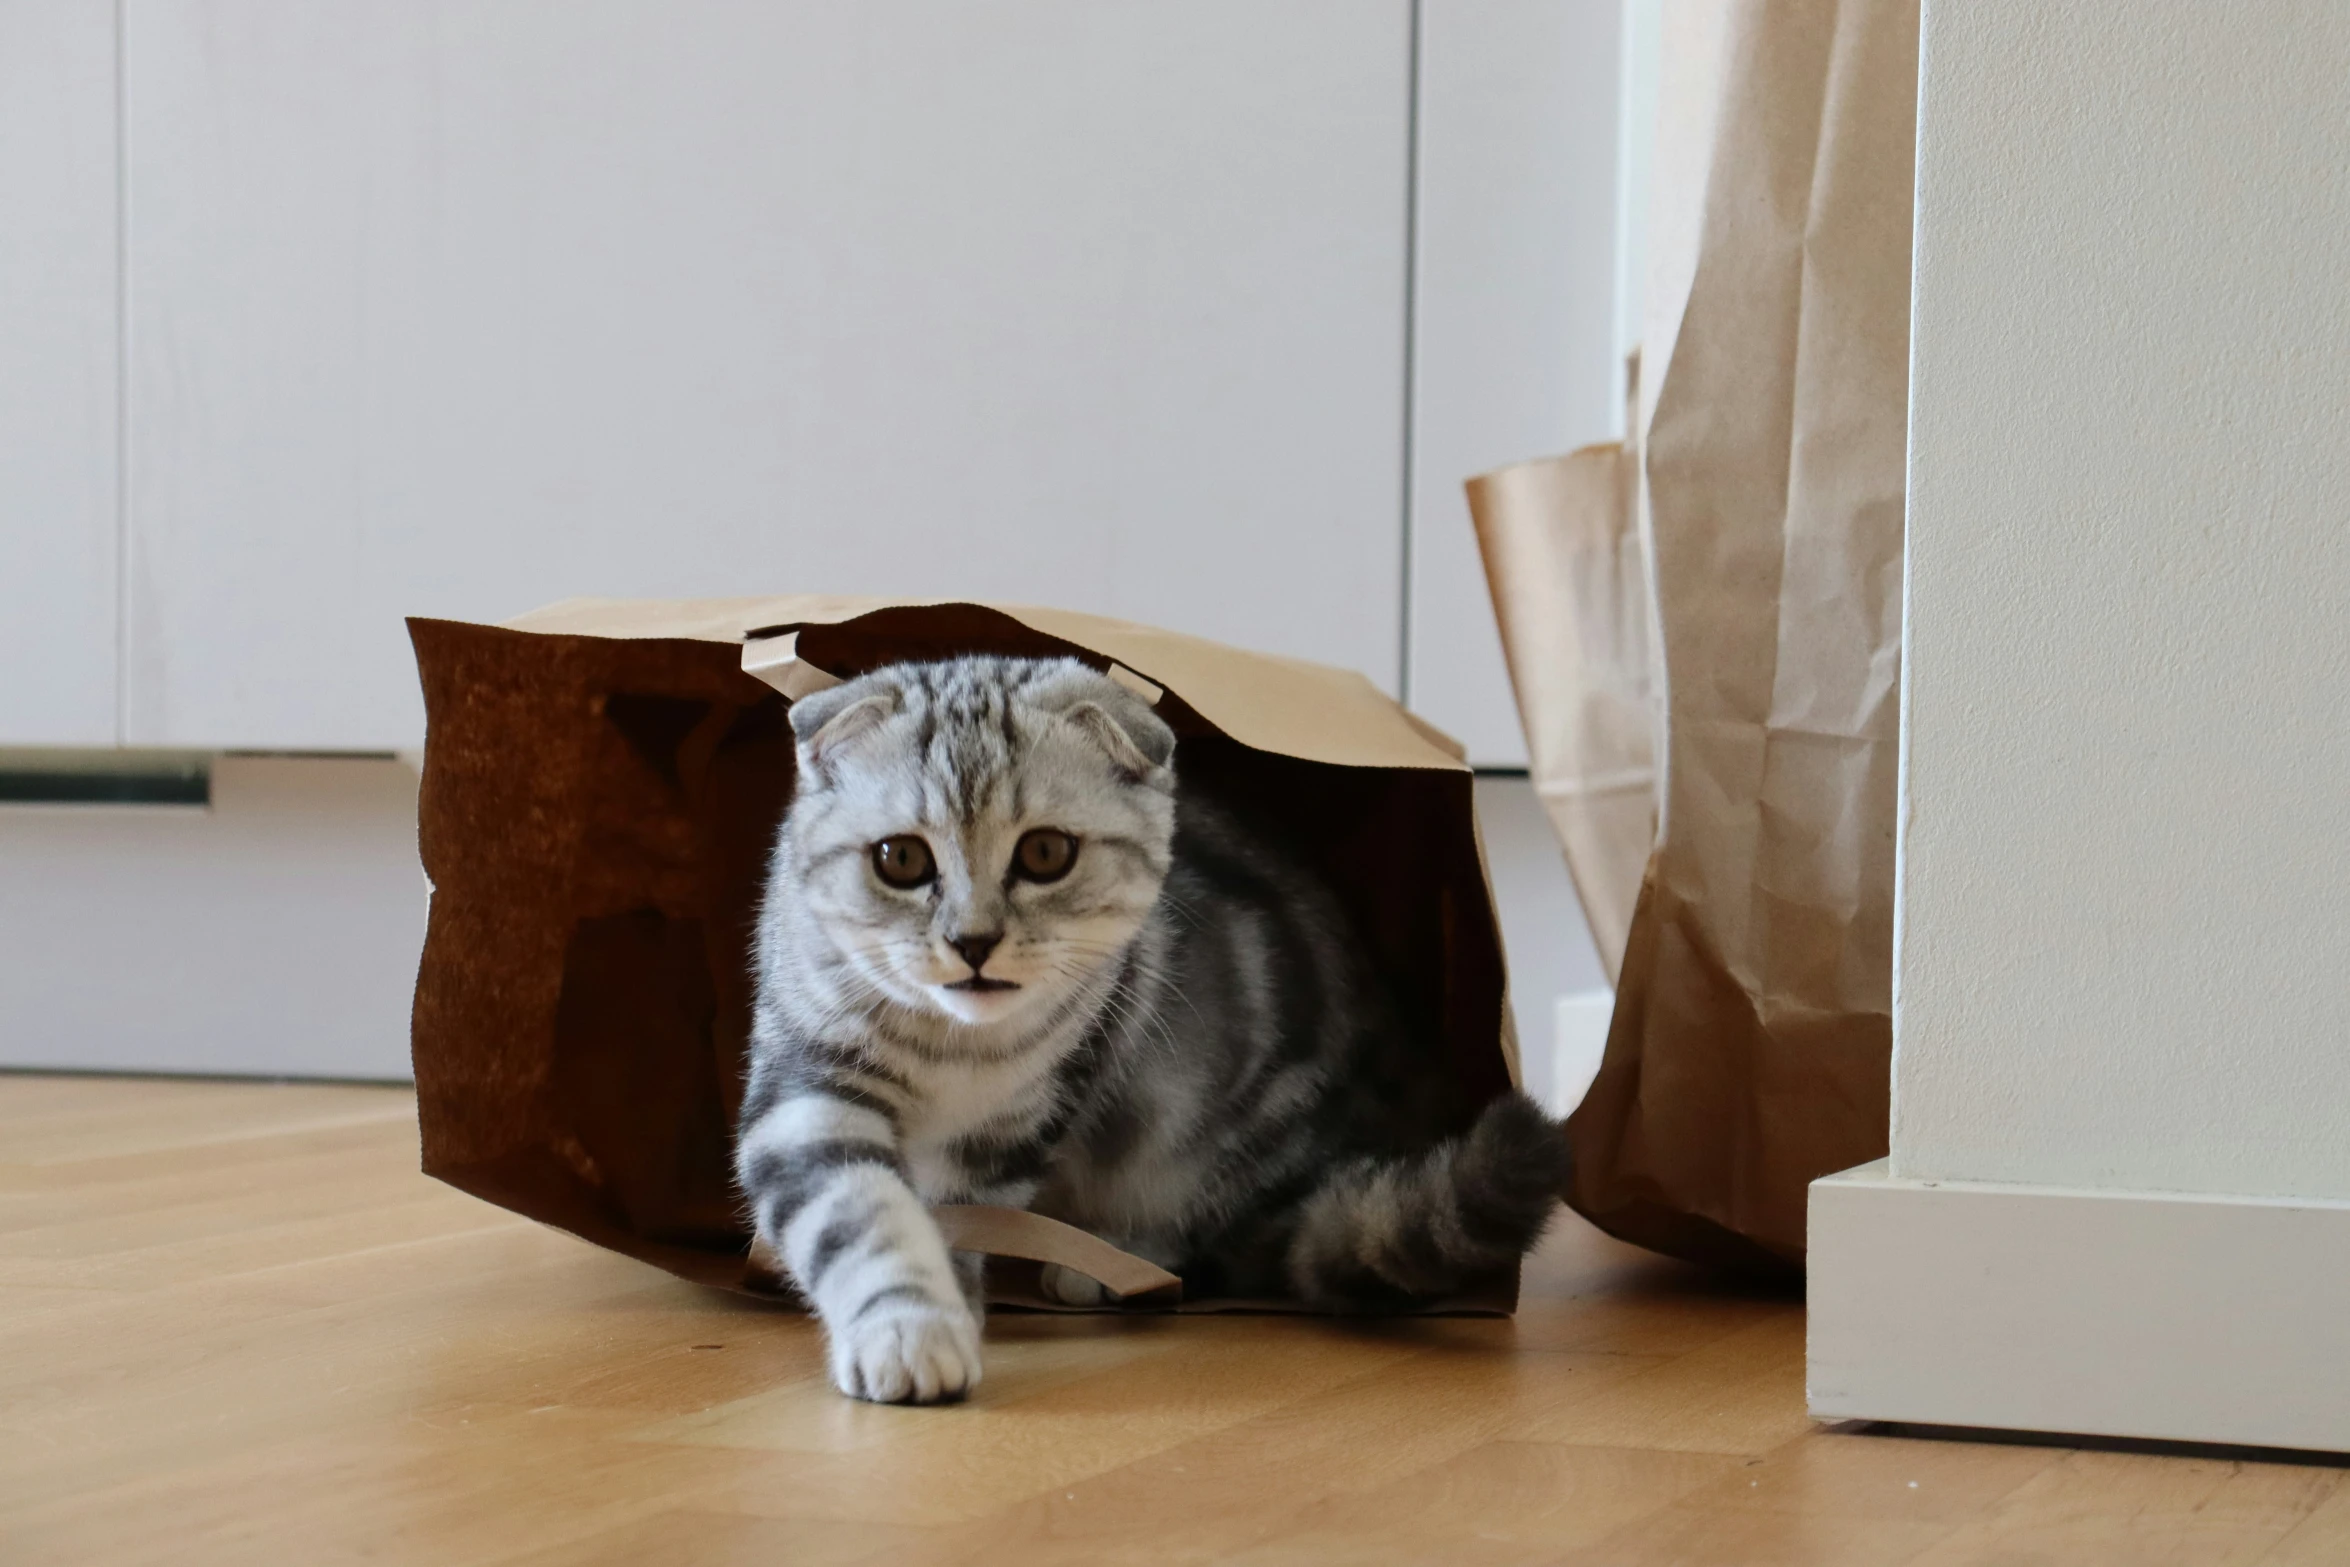 the small kitten is looking out of the paper bag